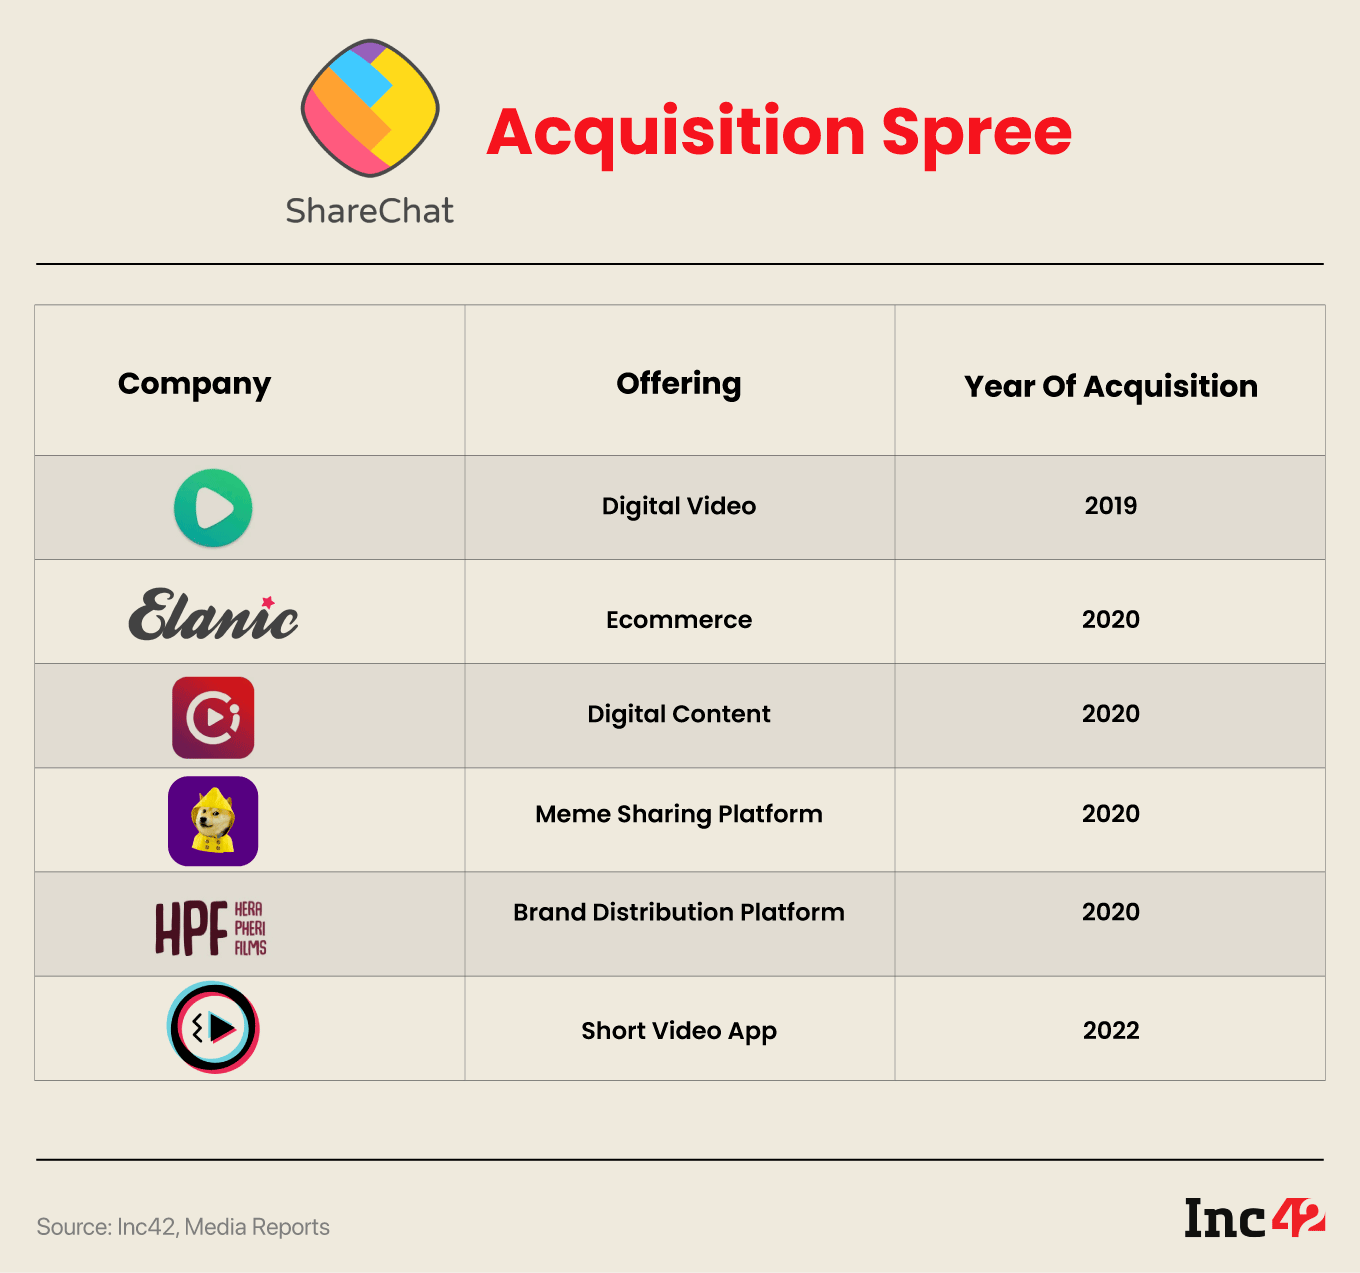 ShareChat's Acquisitions Over The Years